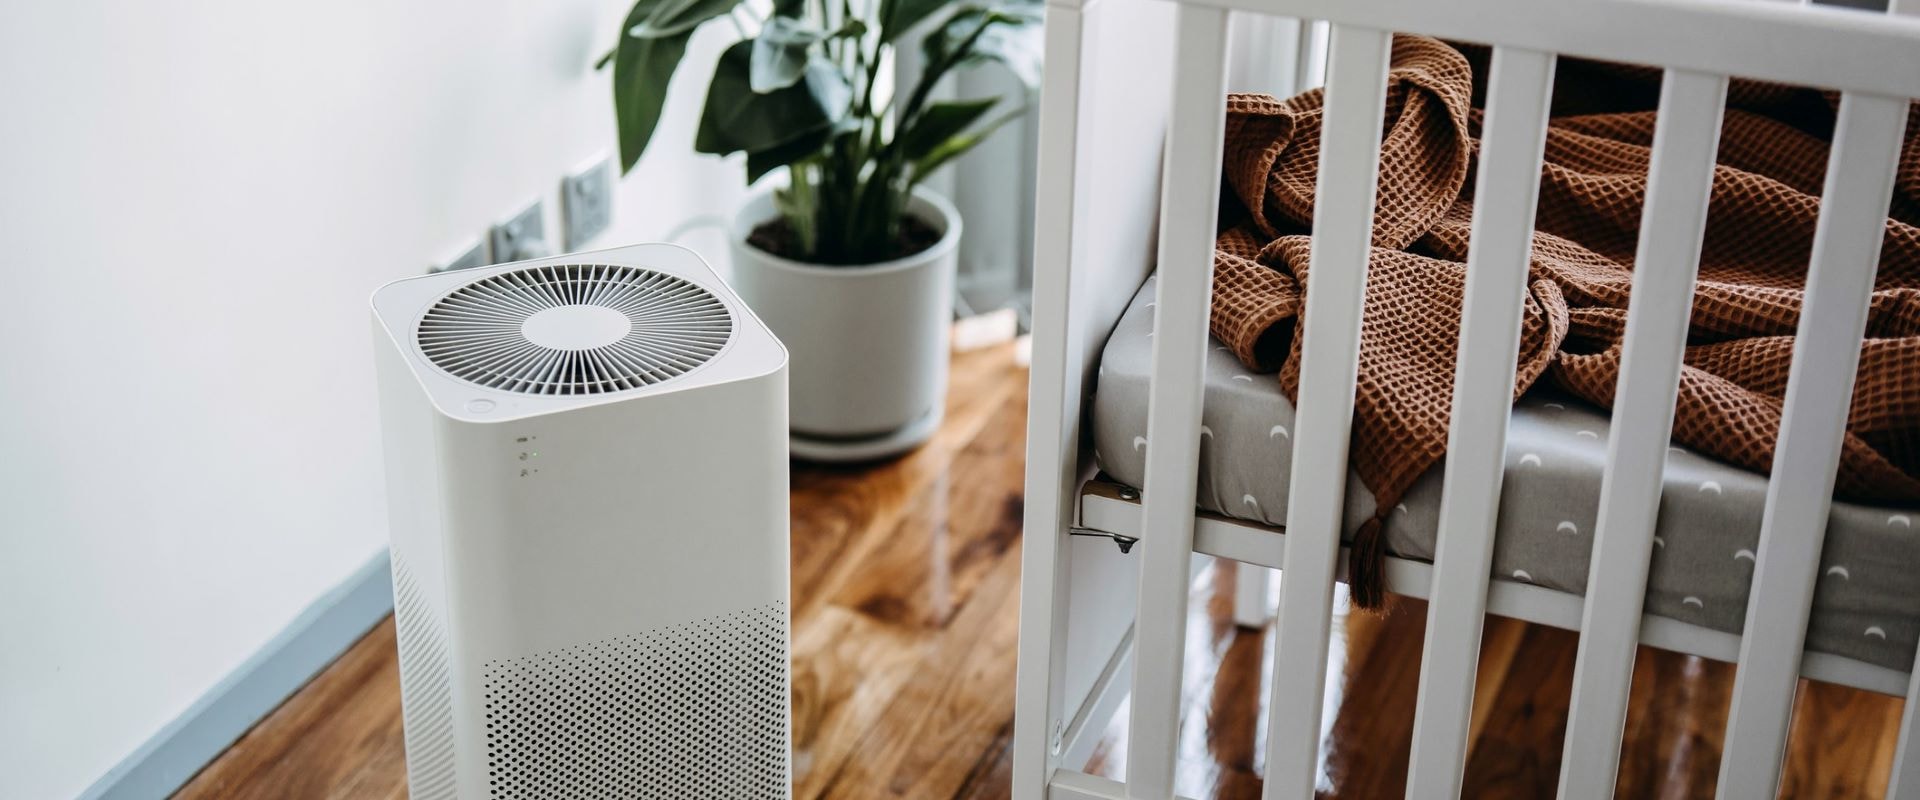 Does an Air Purifier in Bedroom Help with Allergies? - A Comprehensive Guide